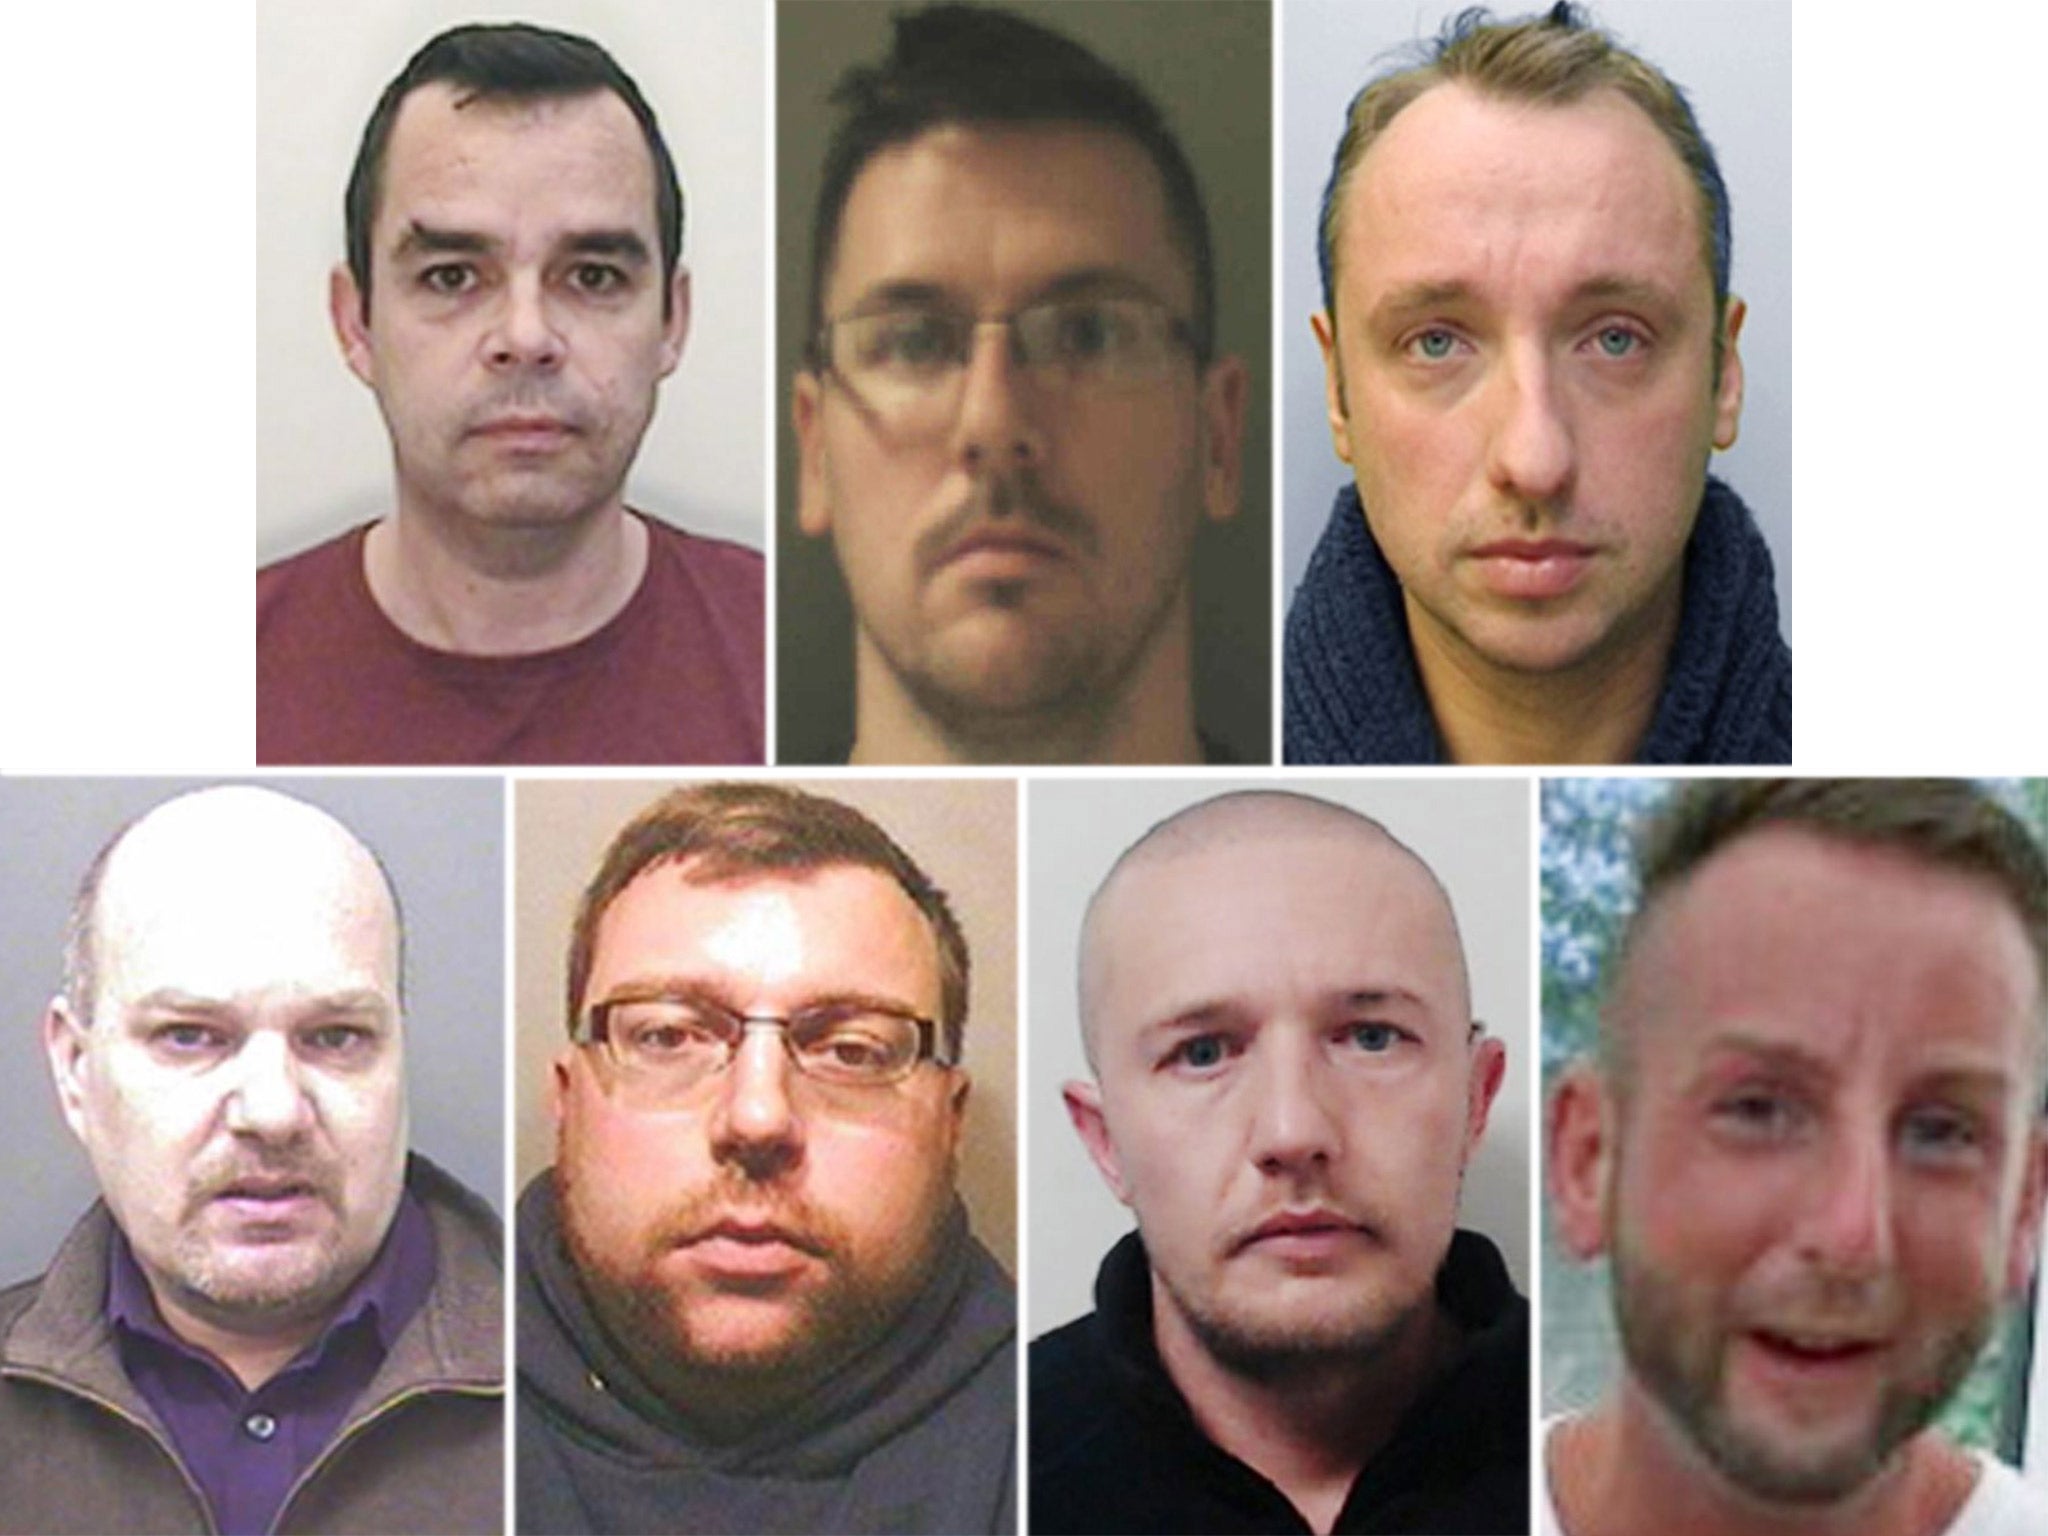 Paedophile Gang Committed Some Of Most Vile And Depraved Offences Police Had Seen The